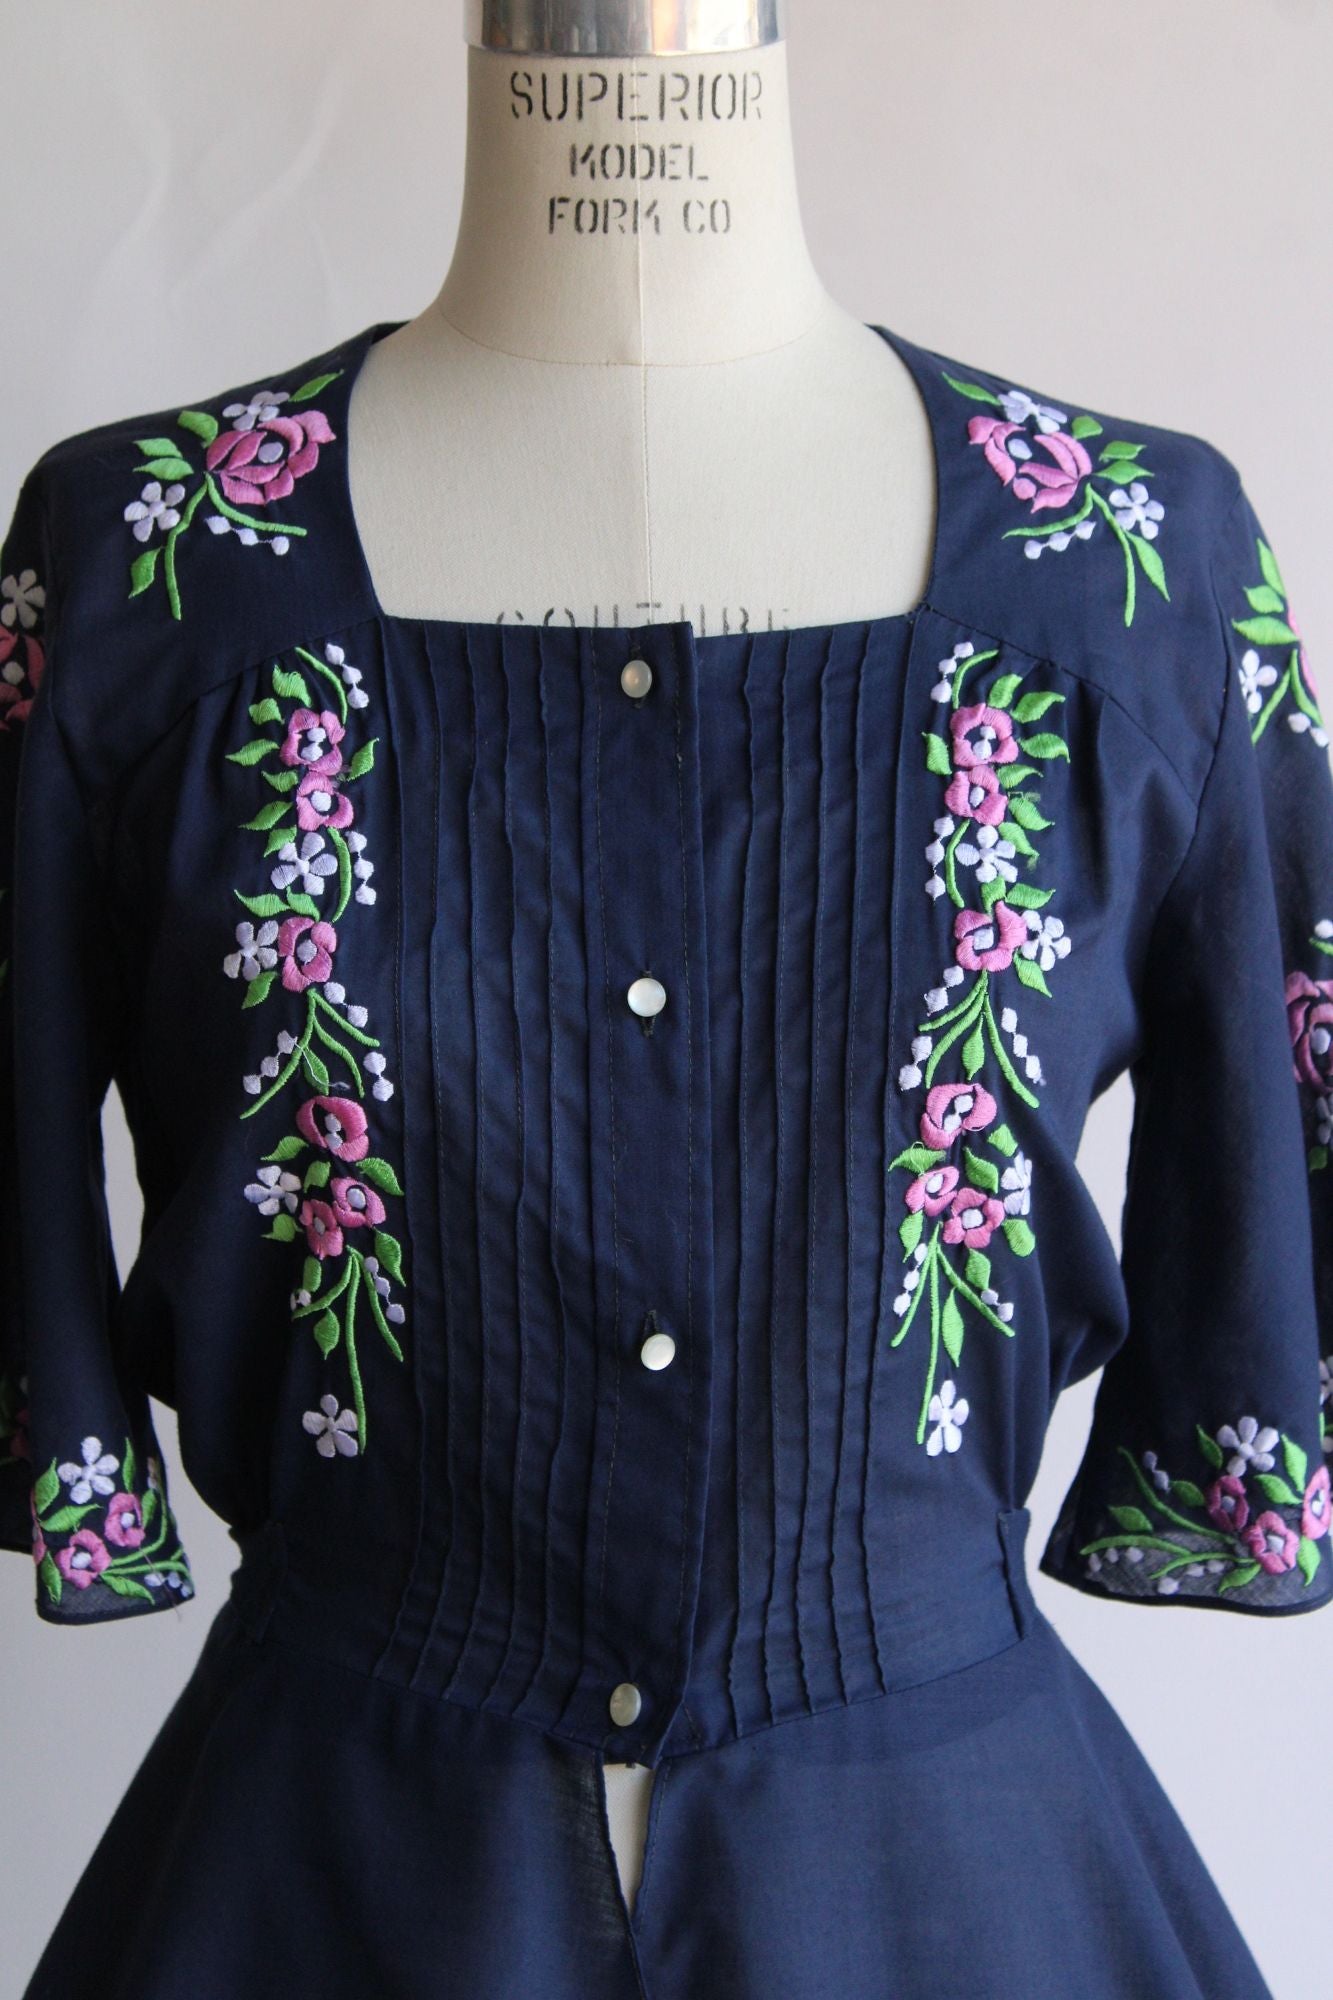 Vintage 1970s 1980s Navy Blue Embroidered Peplum Top